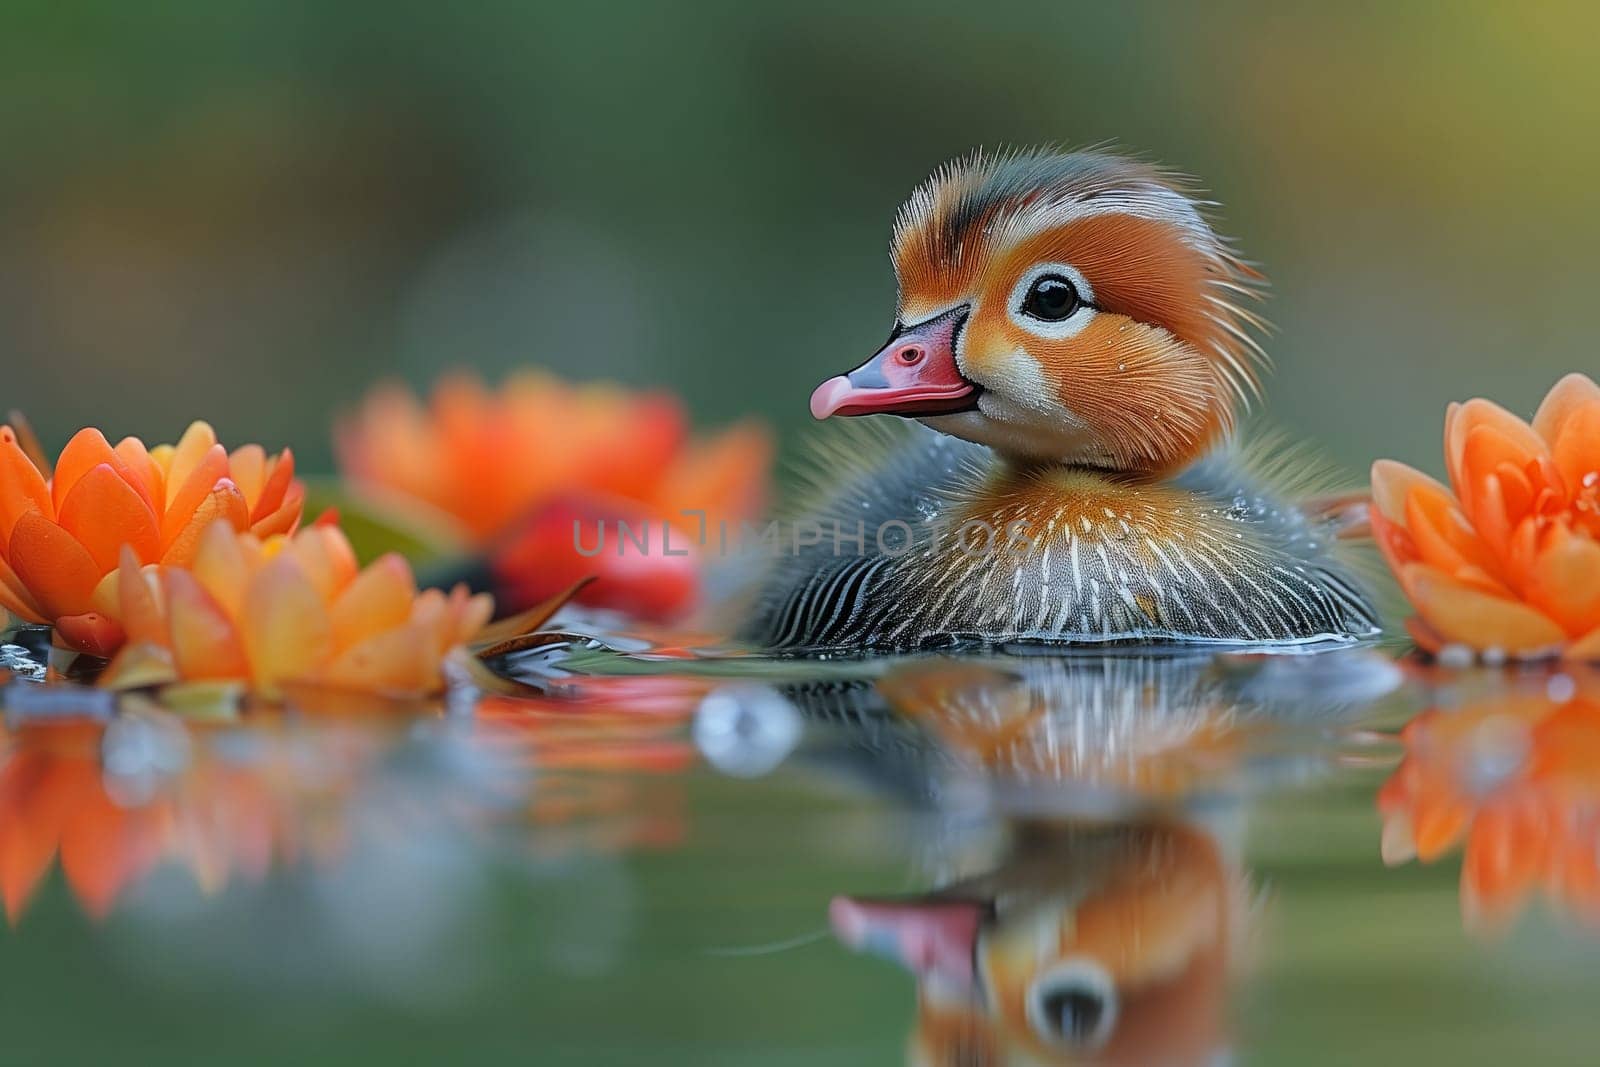 A duckling swims in a pond with orange flowers, surrounded by other waterfowl by richwolf